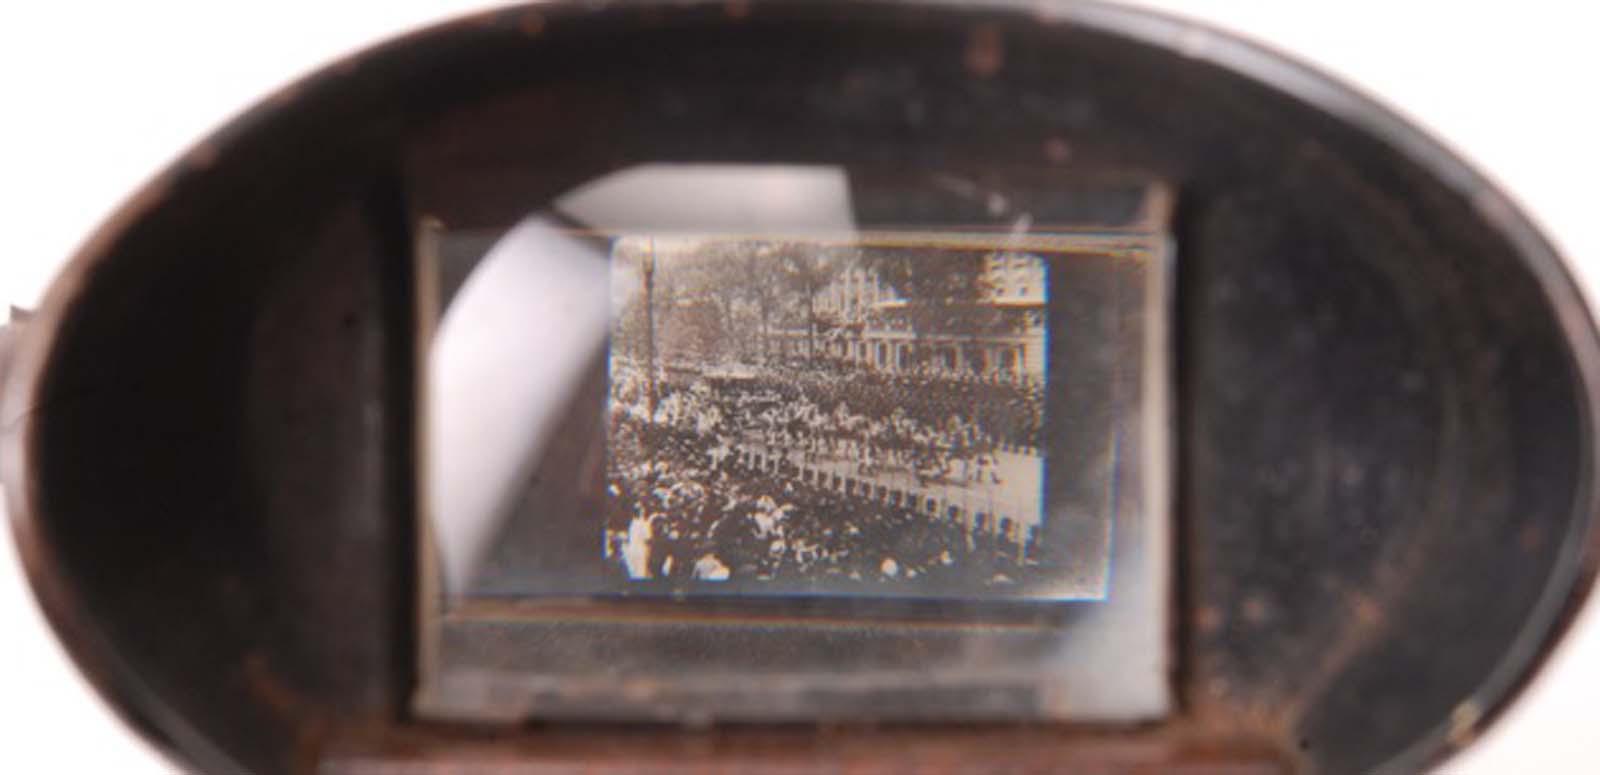 Looking through the viewing lens of a kinora at an image of a crowd scene.